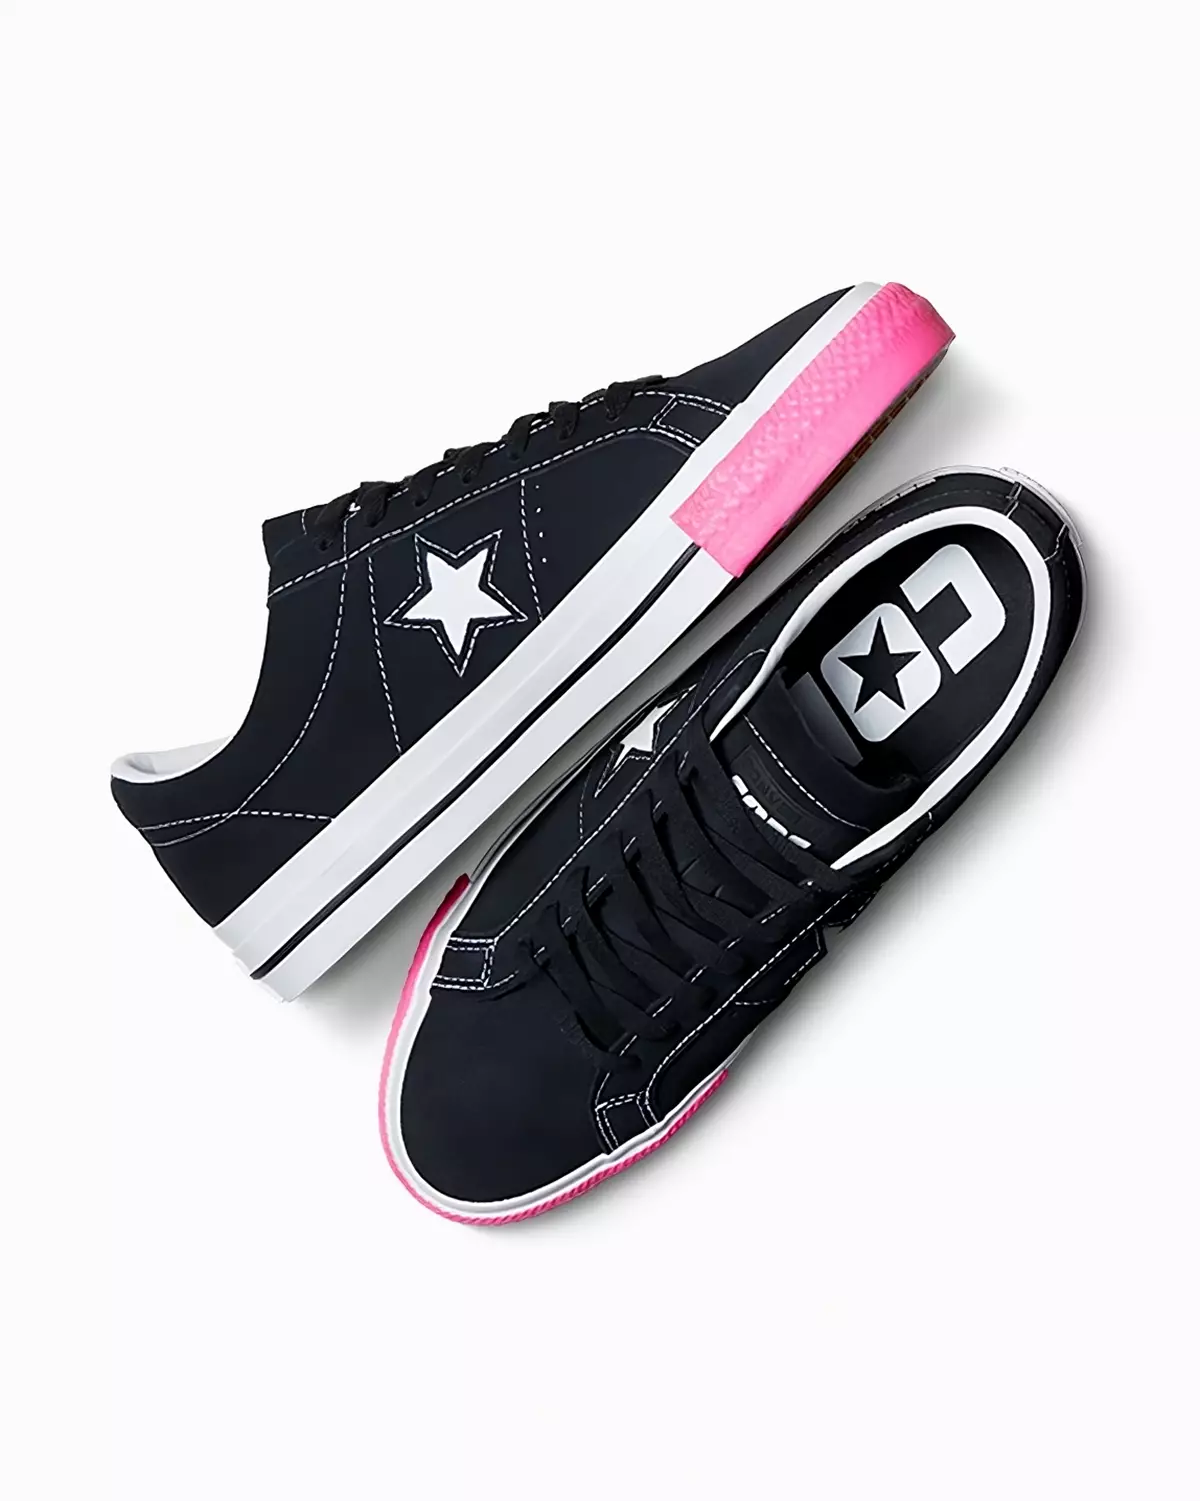 Converse One Star Pro City Pack Unveils Urban Connection